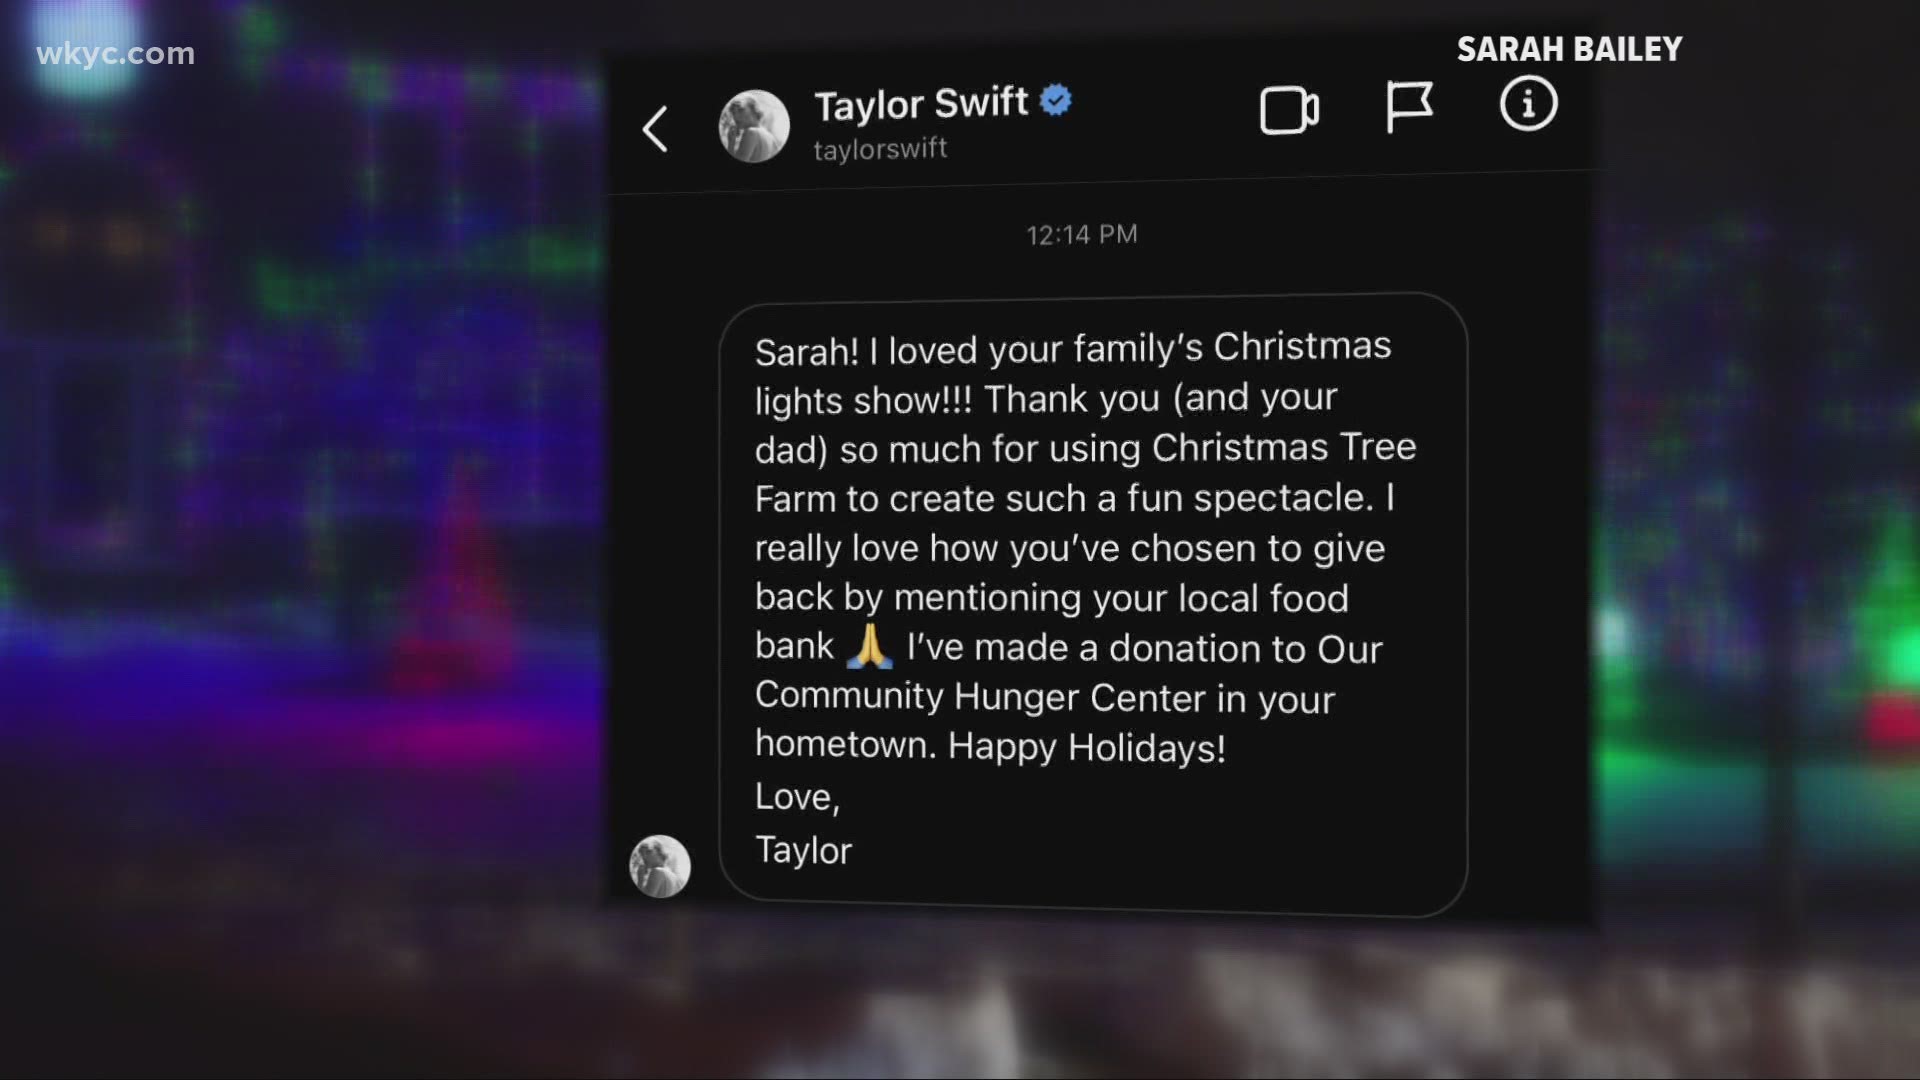 Taylor Swift donates to Twinsburg food bank after fan creates Christmas display inspired by one of her songs